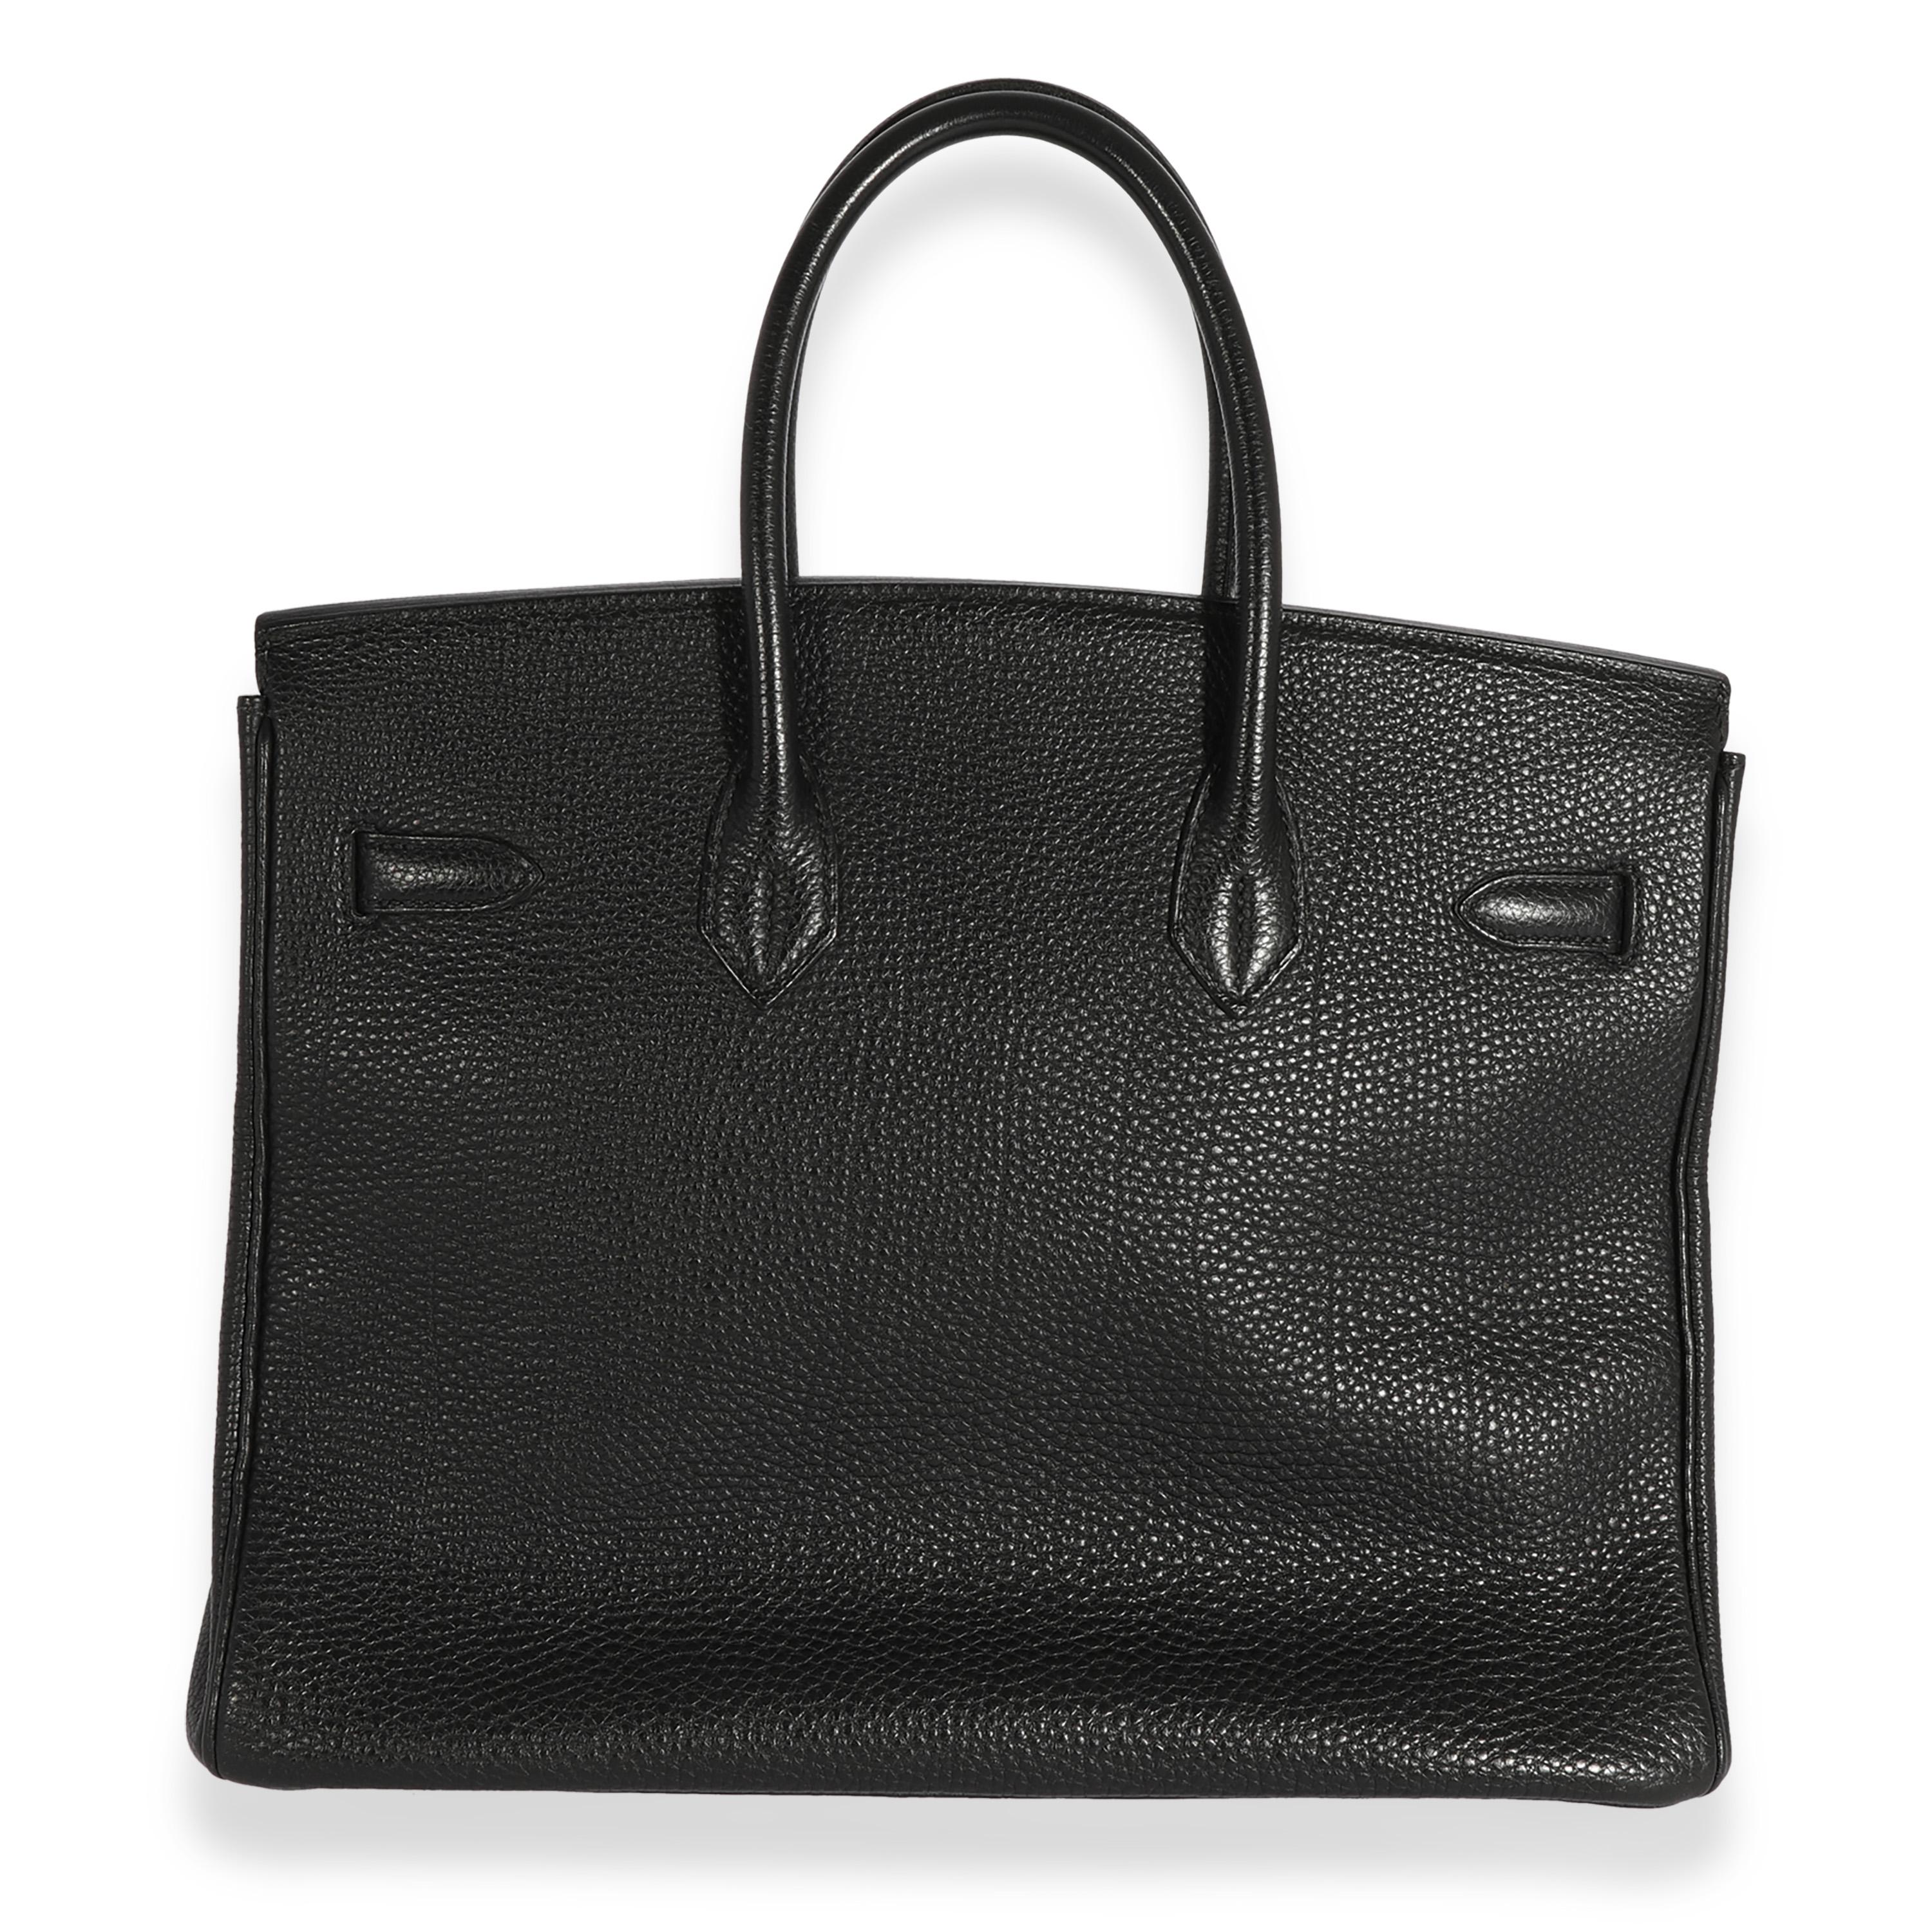 Listing Title: Hermès Black Togo Birkin 35 PHW
SKU: 123689
Condition: Pre-owned 
Handbag Condition: Very Good
Condition Comments: Very Good Condition. Faint scuffing to corners. Scratching and tarnishing to hardware. Monogrammed 'AKL' at interior